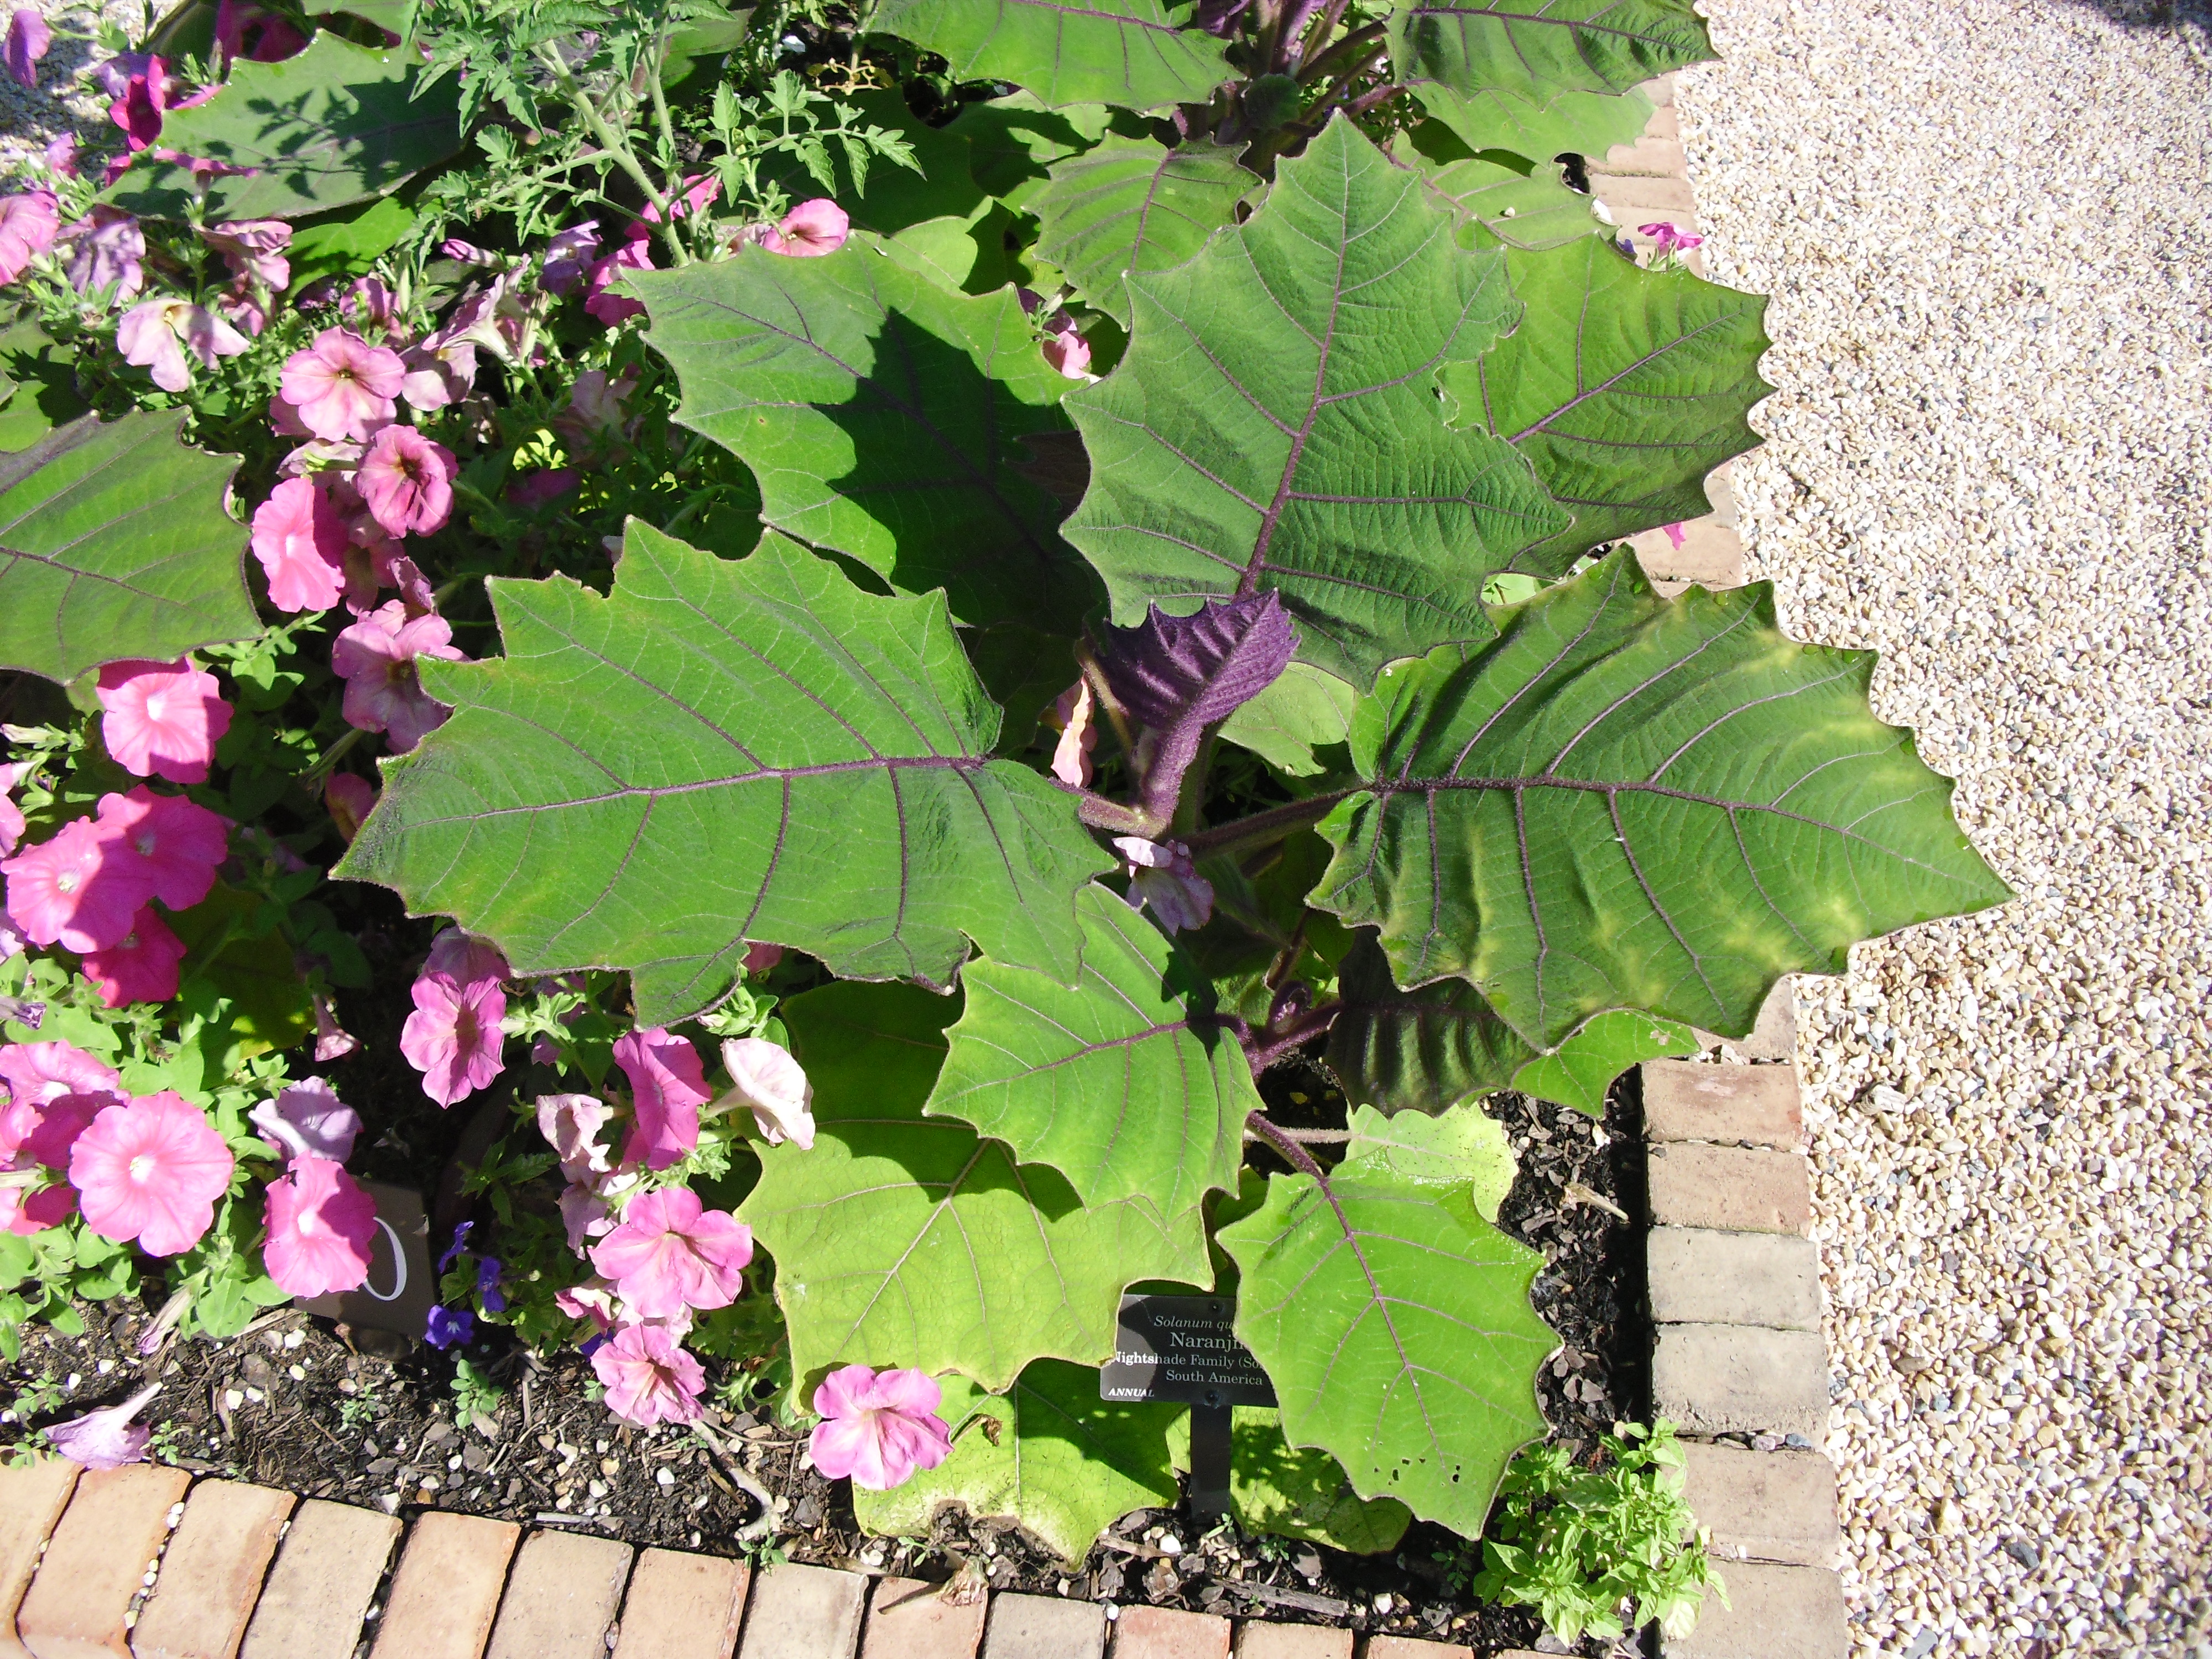 PHOTO: The naranjilla plant has thick green leaves that are about 10-12 inches long, 8-10 inches wide, with deeply serrated edges. Leaves have dark purple hairs on the veins and petioles.